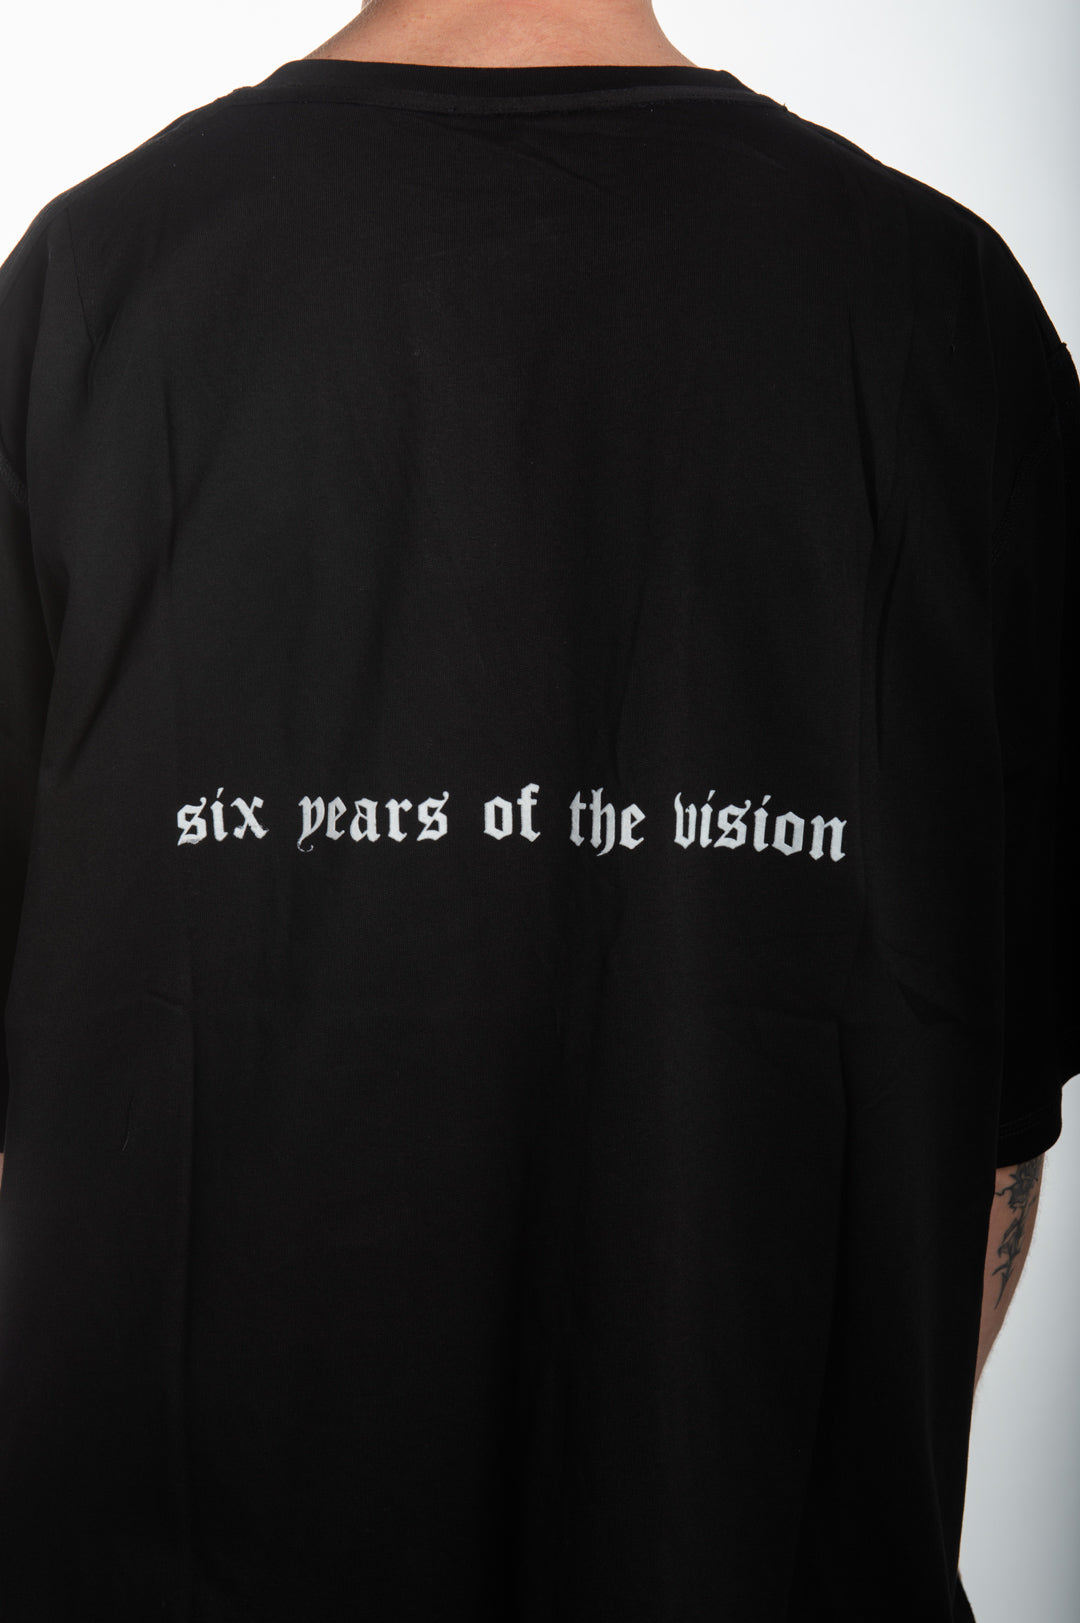 “SIX YEARS OF THE VISION” Oversized Shirt